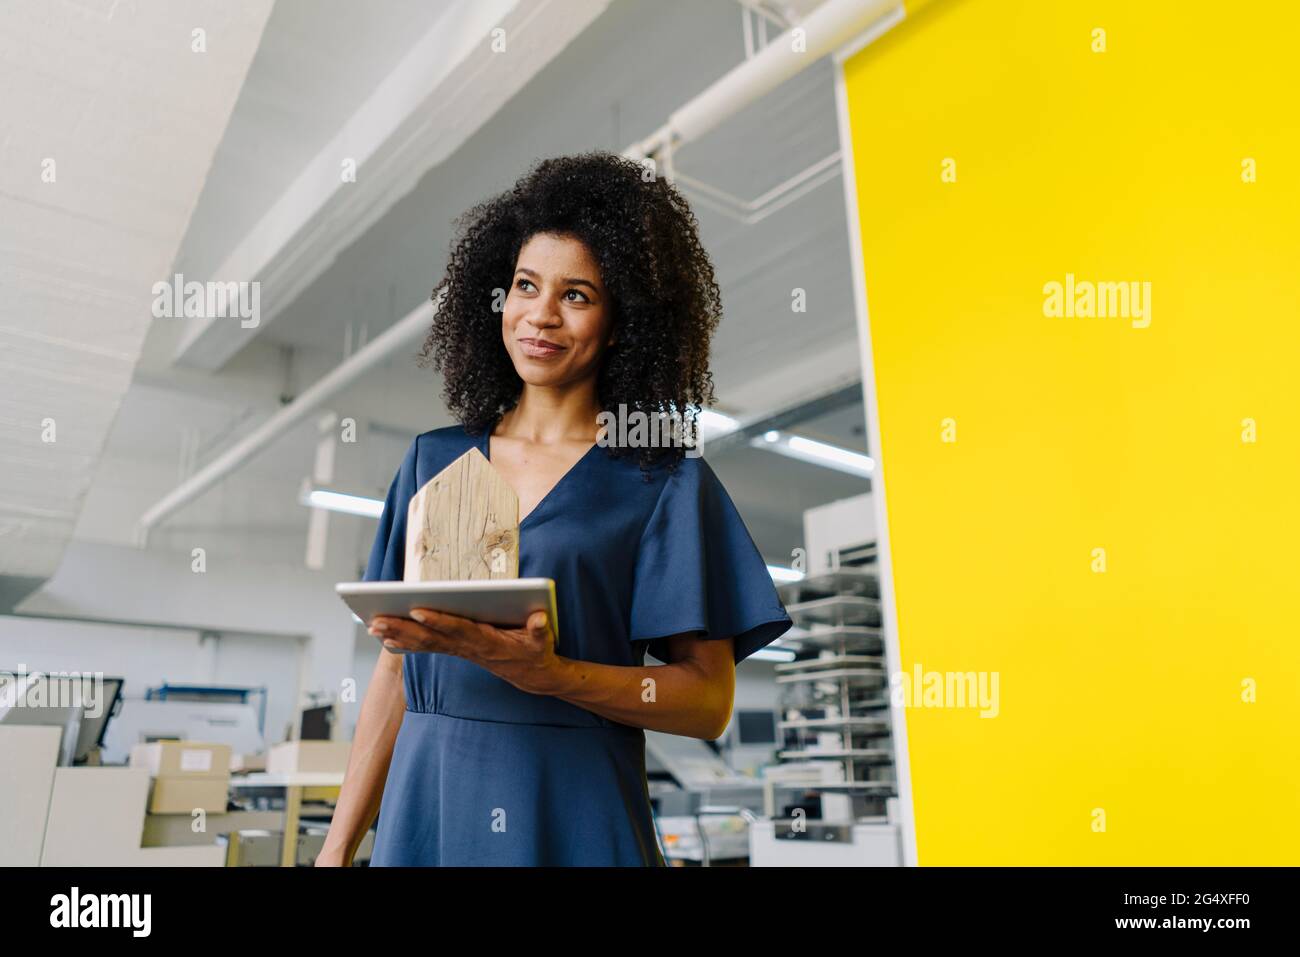 Female real estate agent holding digital tablet and house model in agency Stock Photo